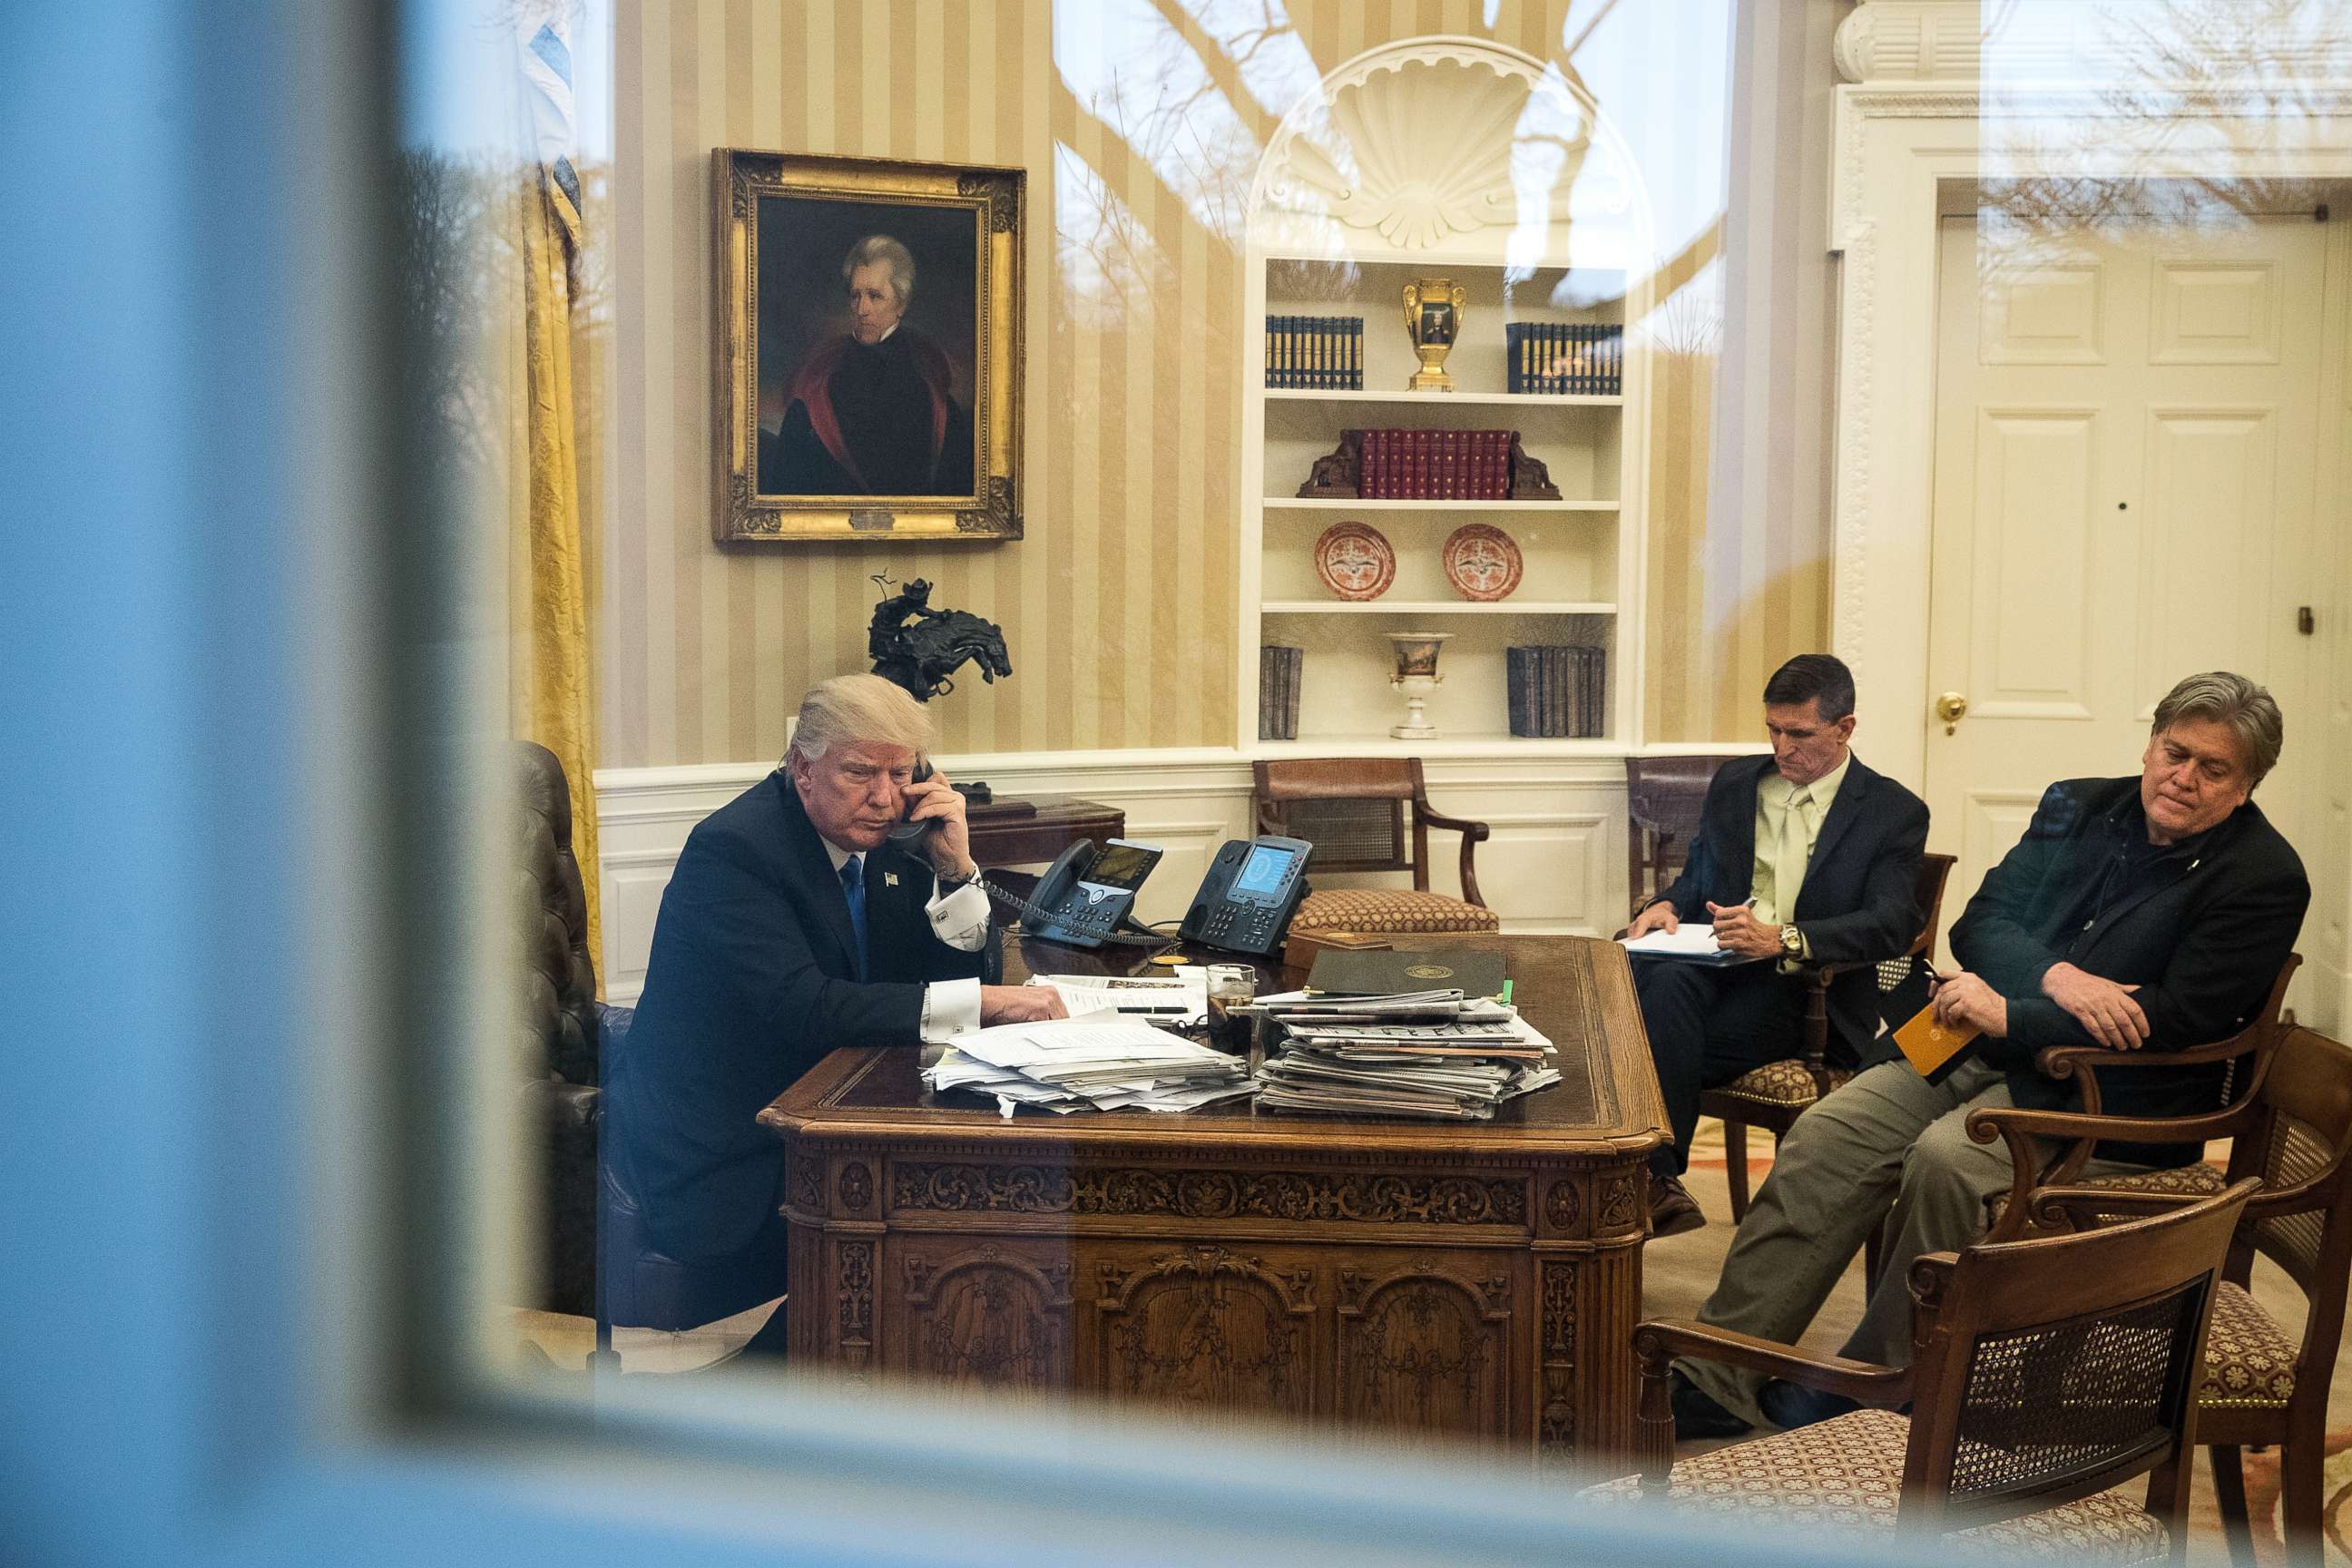 PHOTO: President Donald Trump speaks on the phone with Australian Prime Minister Malcolm Turnbull in the Oval Office of the White House, Jan. 28, 2017. National Security Advisor Michael Flynn and White House Chief Strategist Steve Bannon were present. 